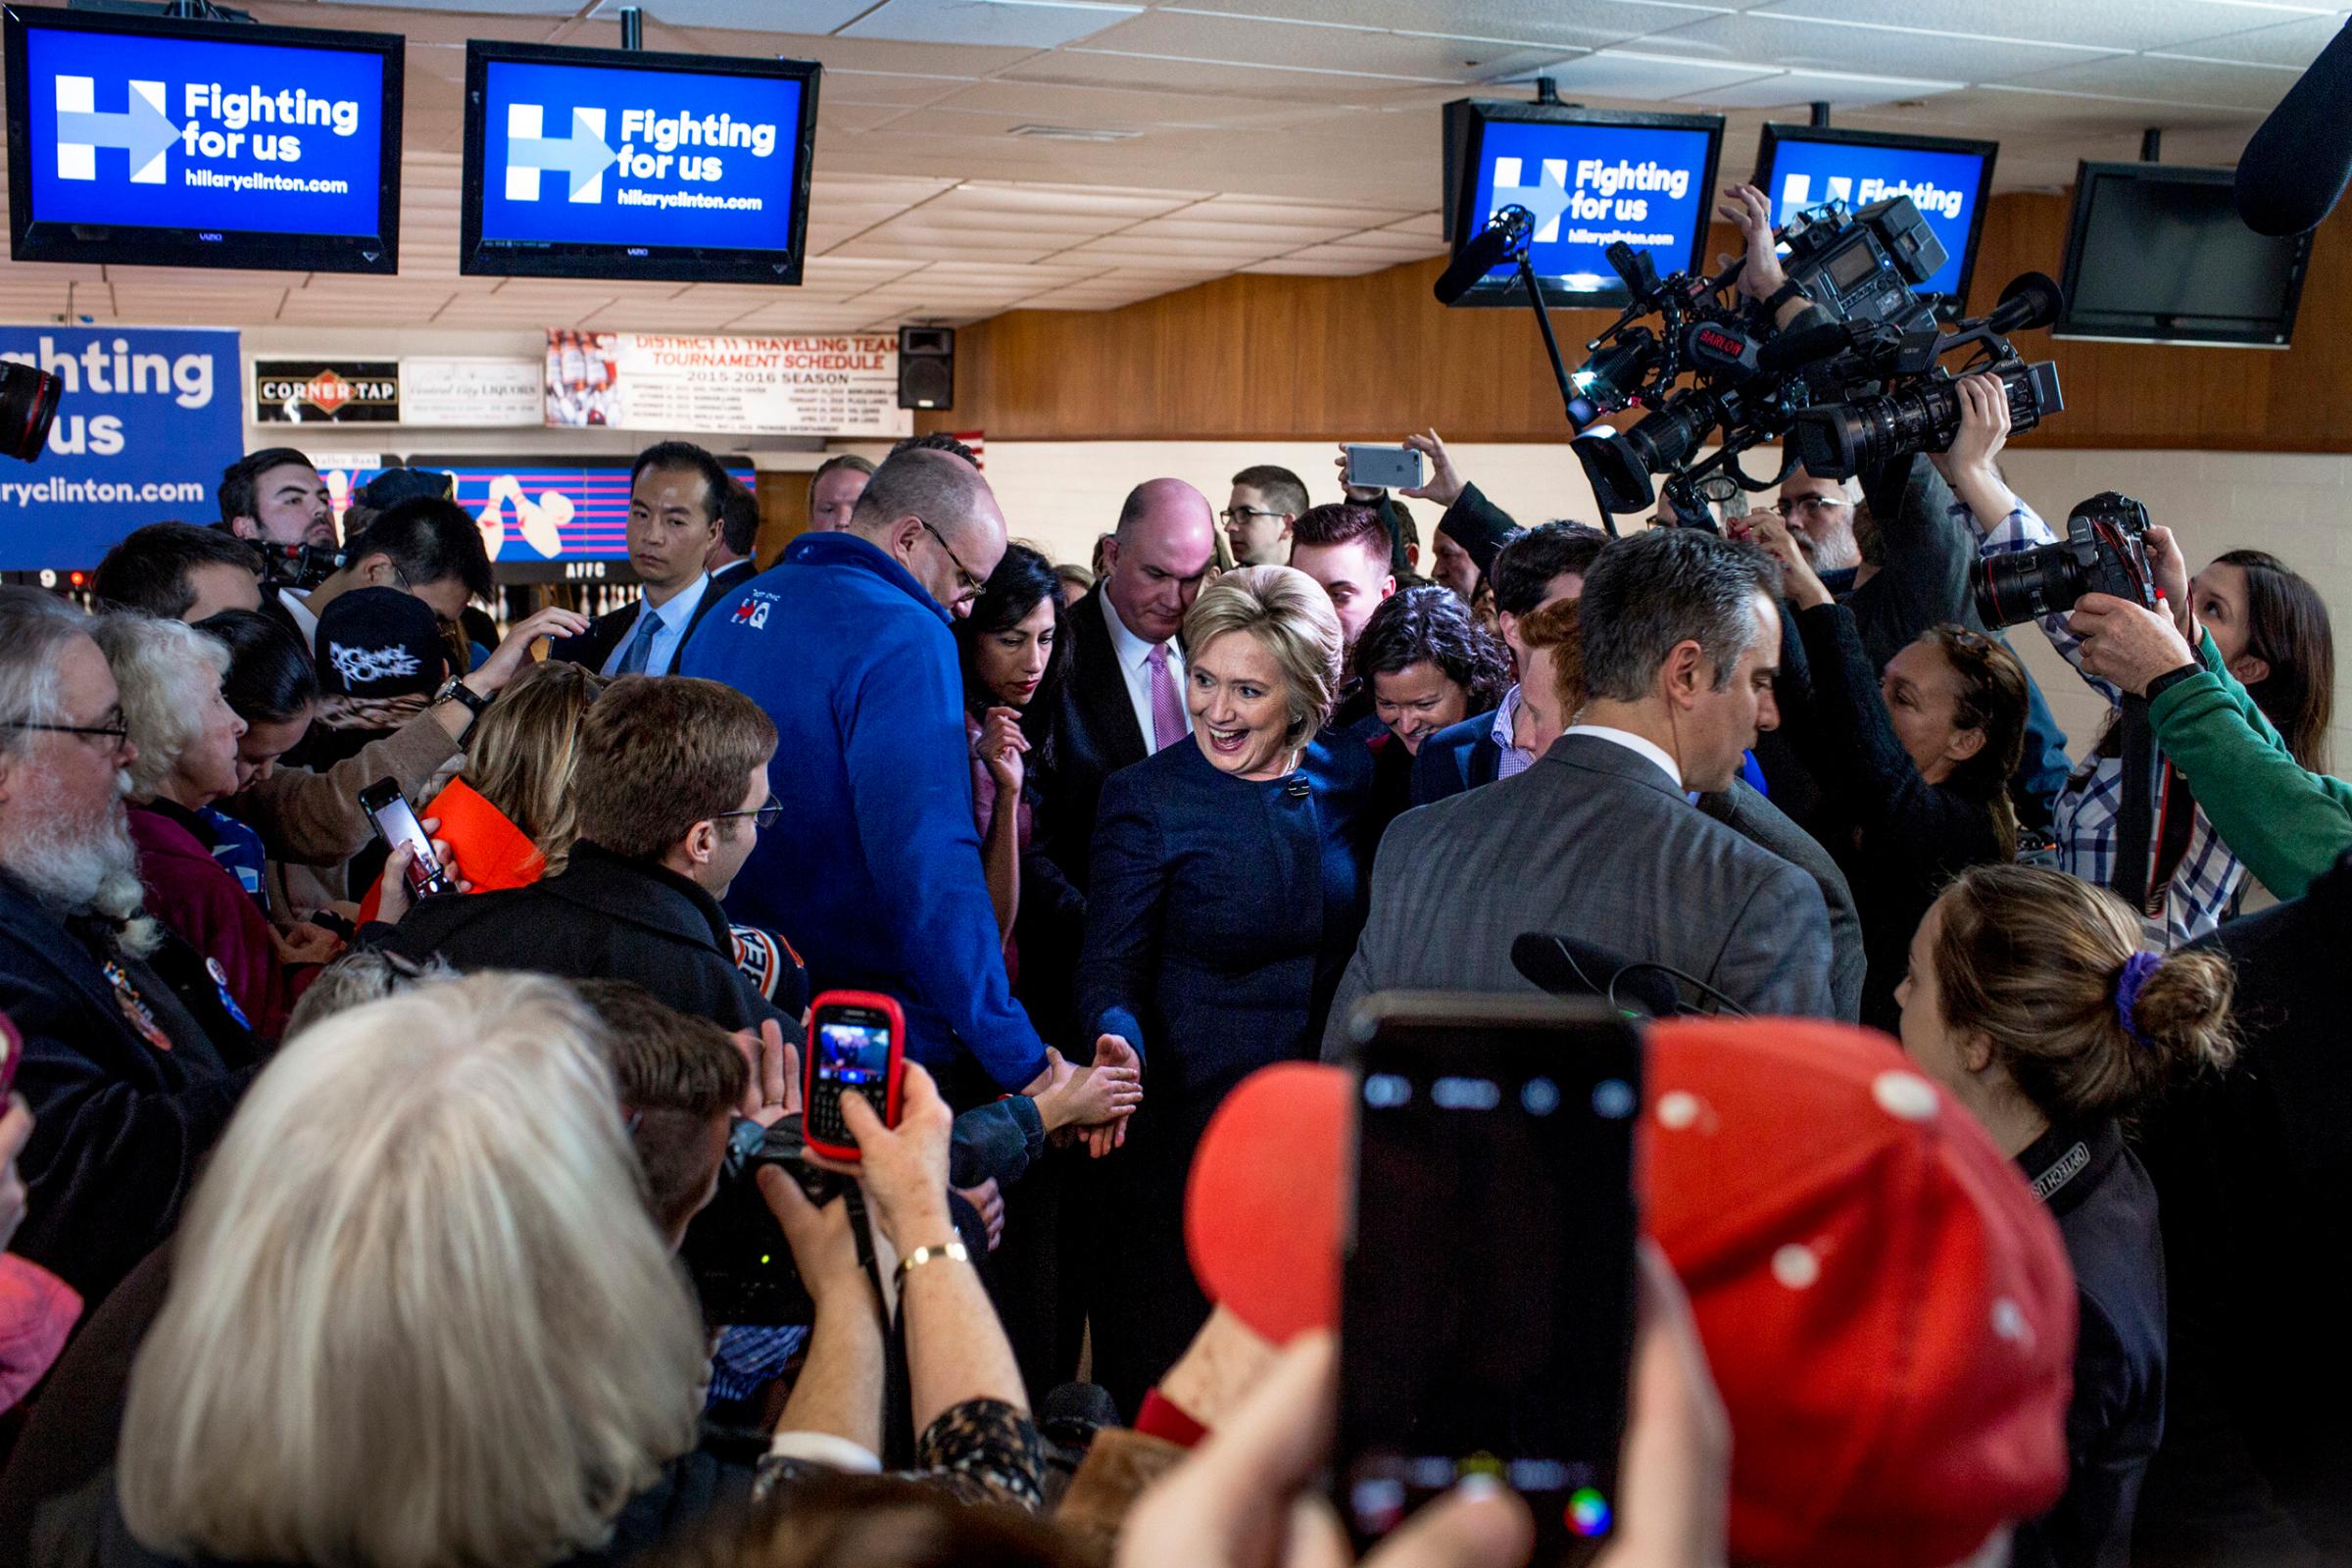 Hillary Clinton spoke to supporters at a campaign rally at the Adel Family Fun Center in Adel Iowa on Wednesday morning, January 27th 2016.(Natalie Keyssar for TIME)